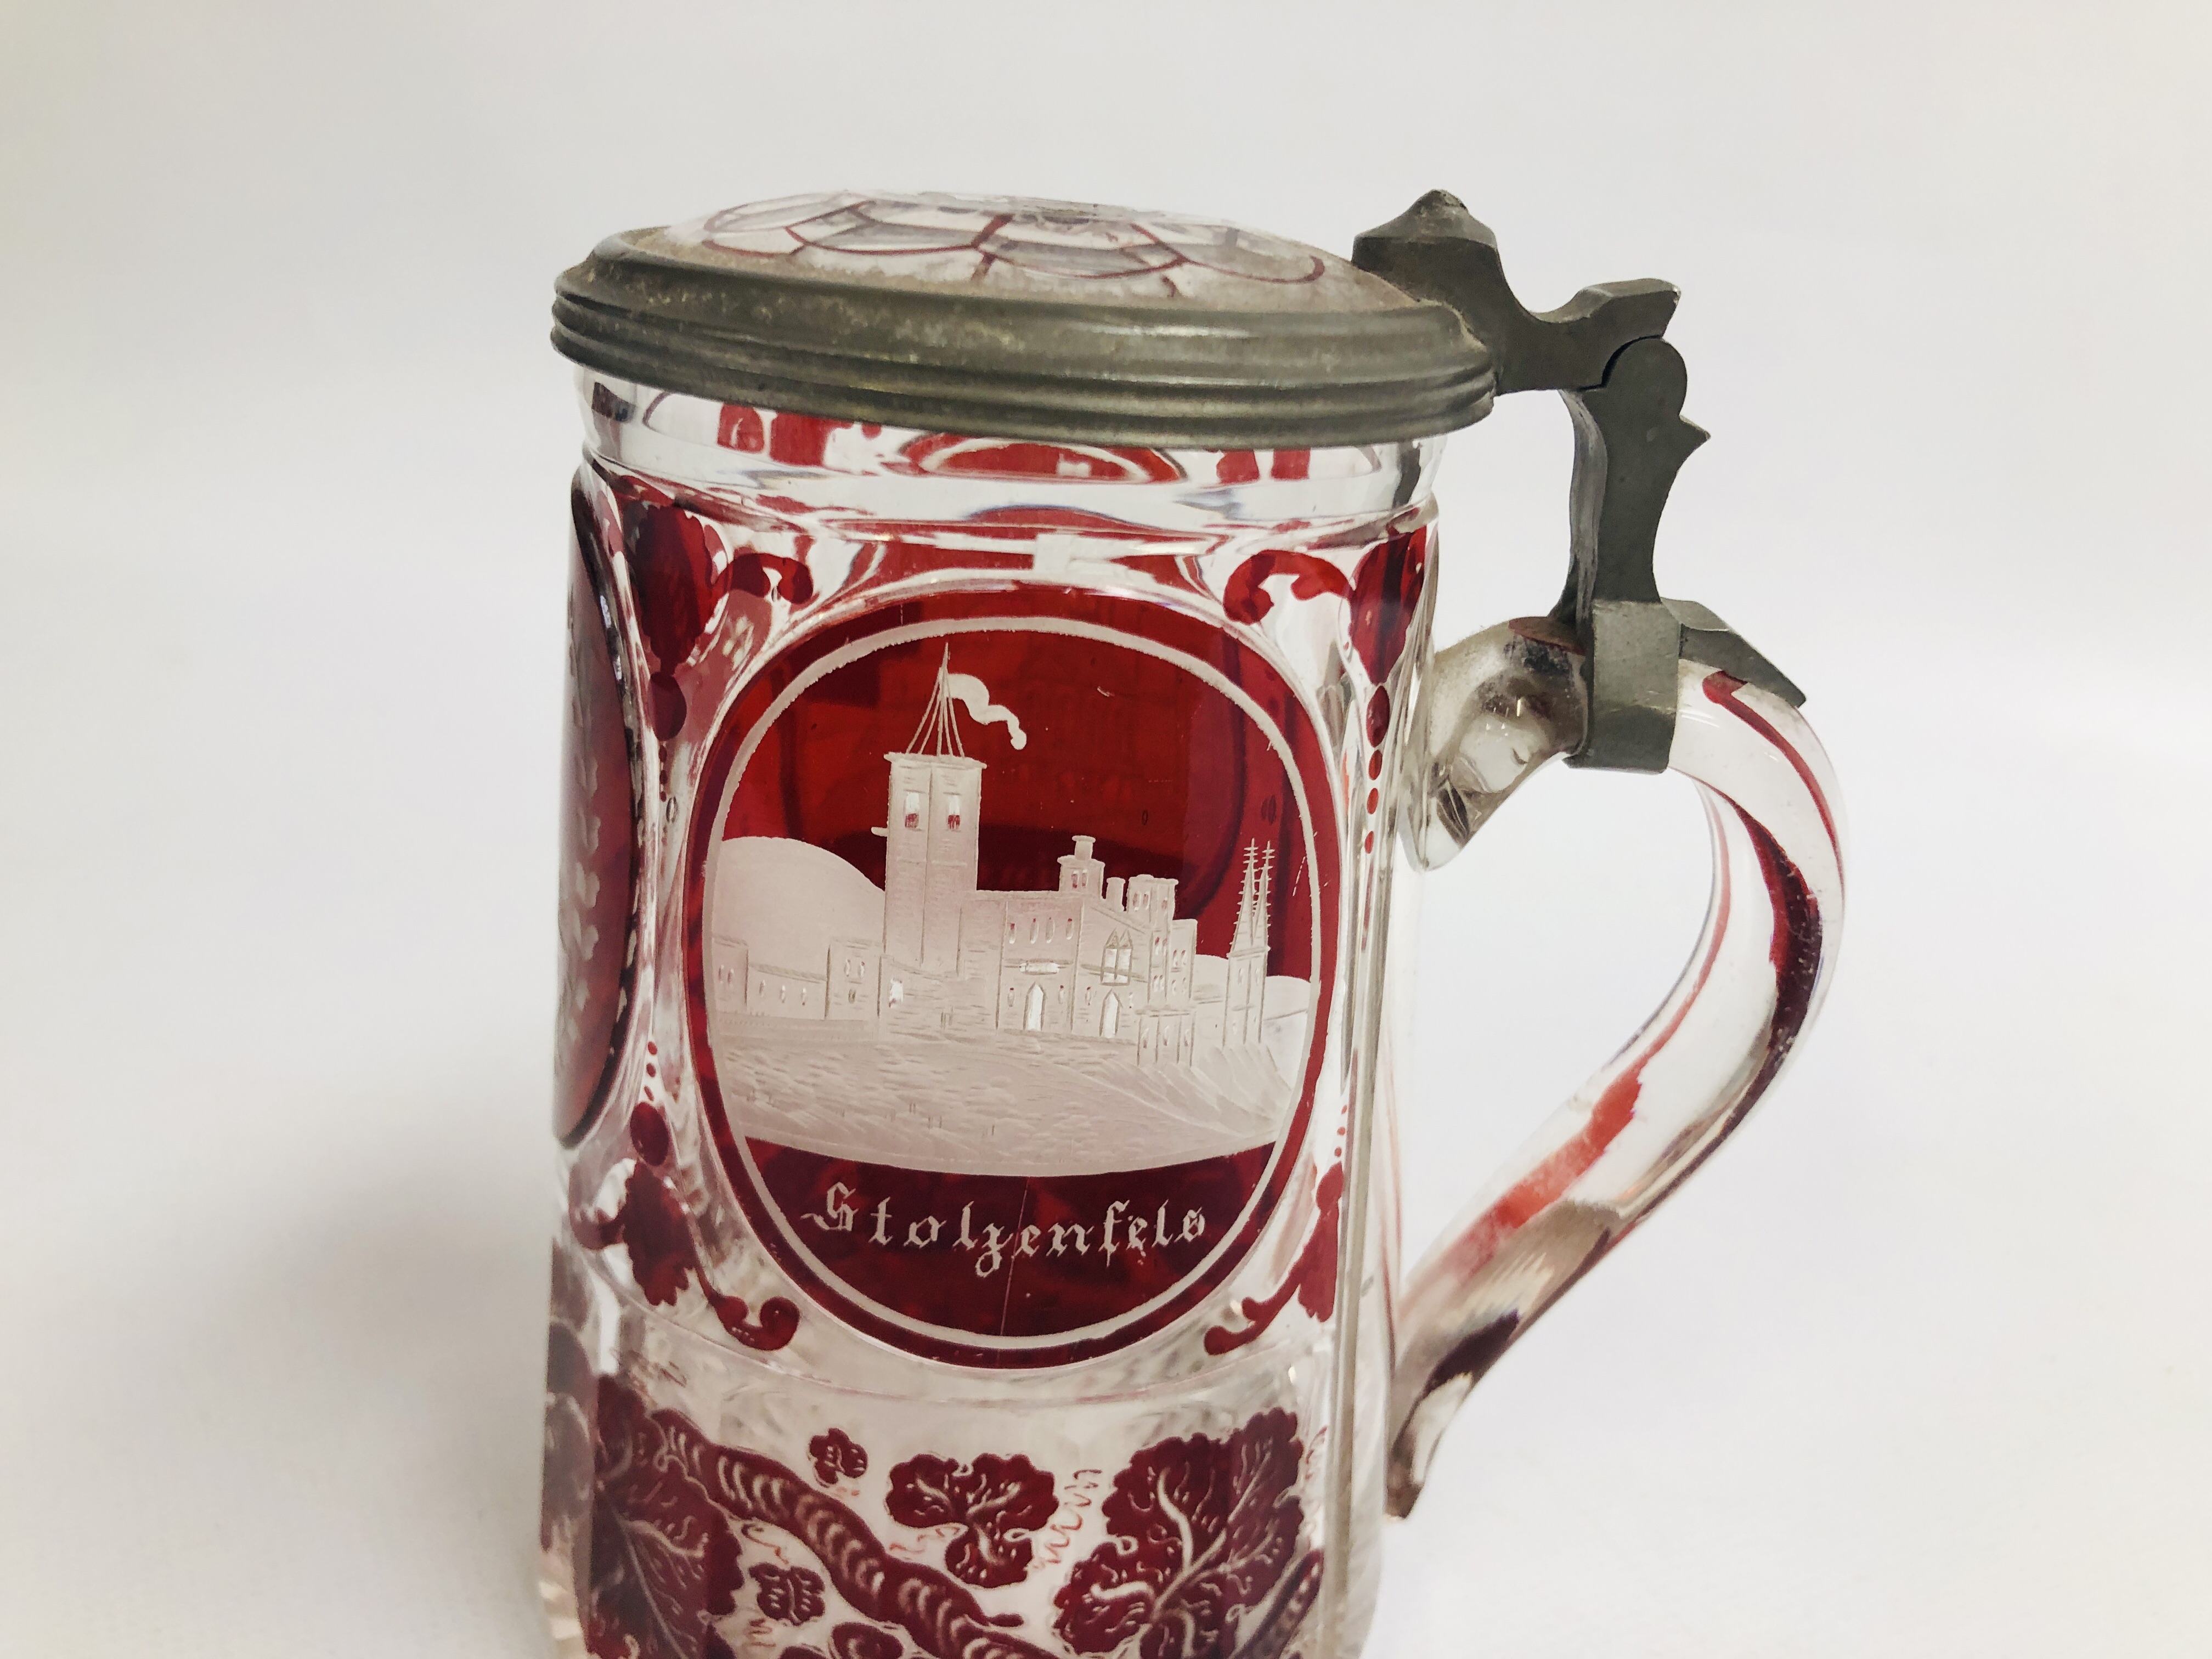 VINTAGE GLASS STEIN WITH ETCHED GLASS DETAIL - Image 2 of 8